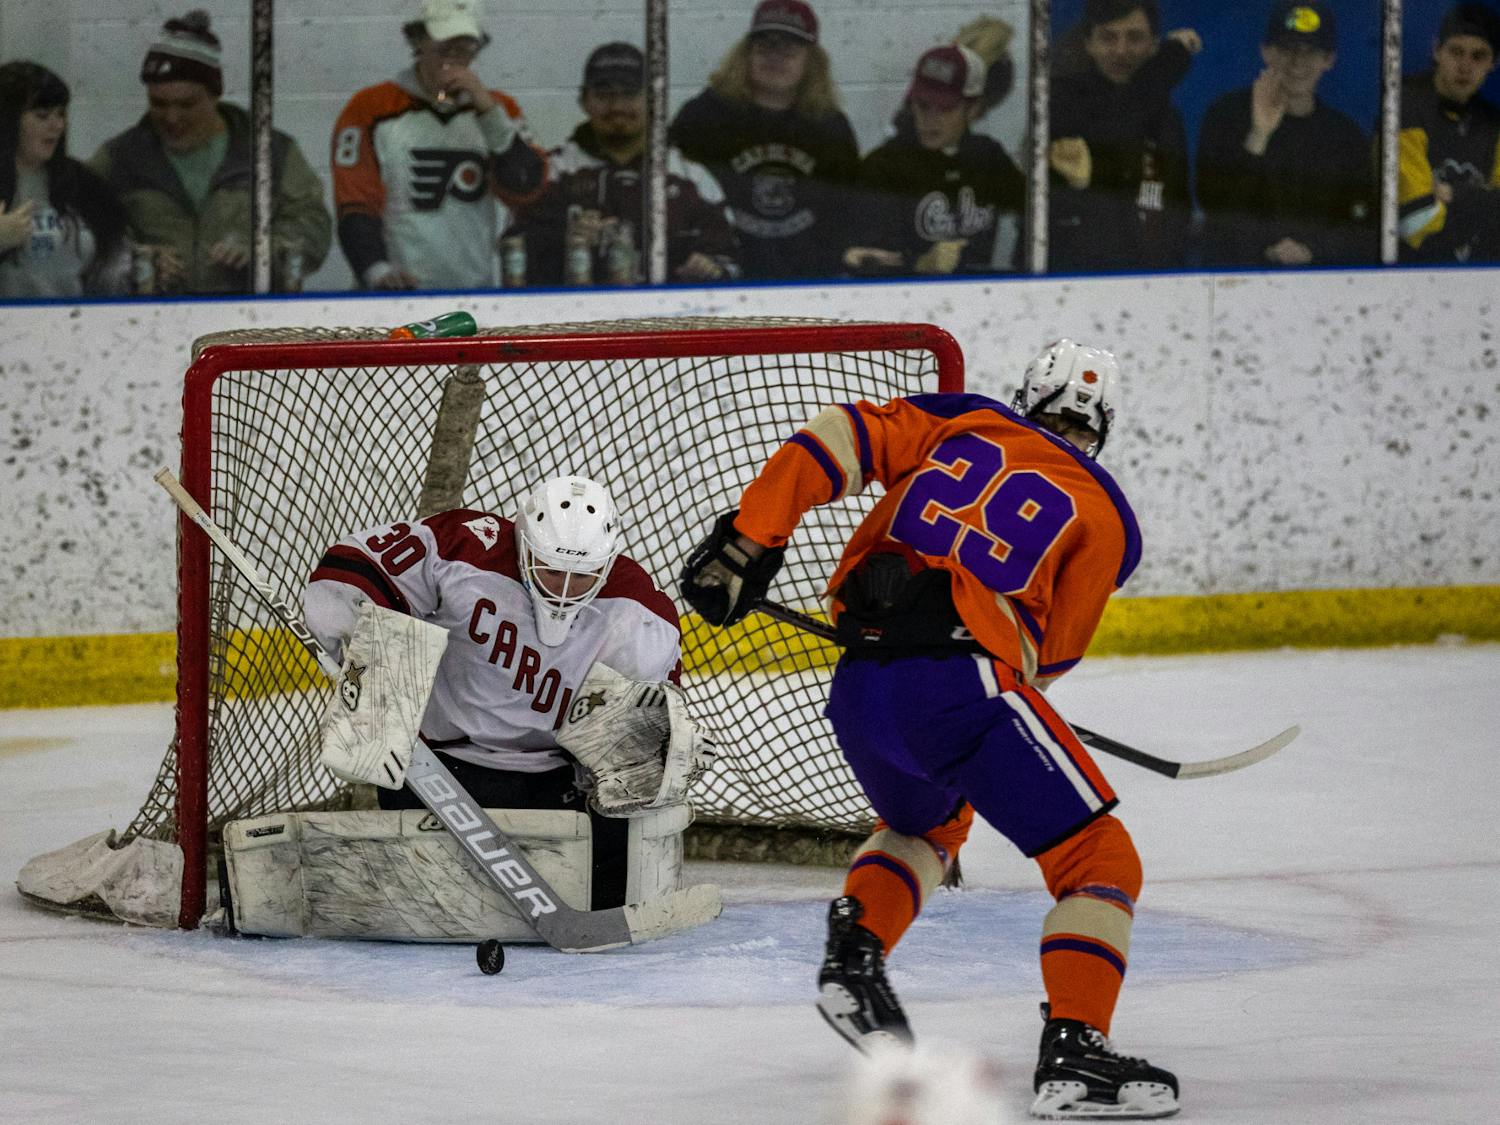 Senior goalie Liam Gormley deflects the puck from an advancing Clemson opponent on Nov. 11, 2022. Clemson failed to overcome the defensive strides from the South Carolina club hockey team, coming up short against the Gamecocks 5-4.